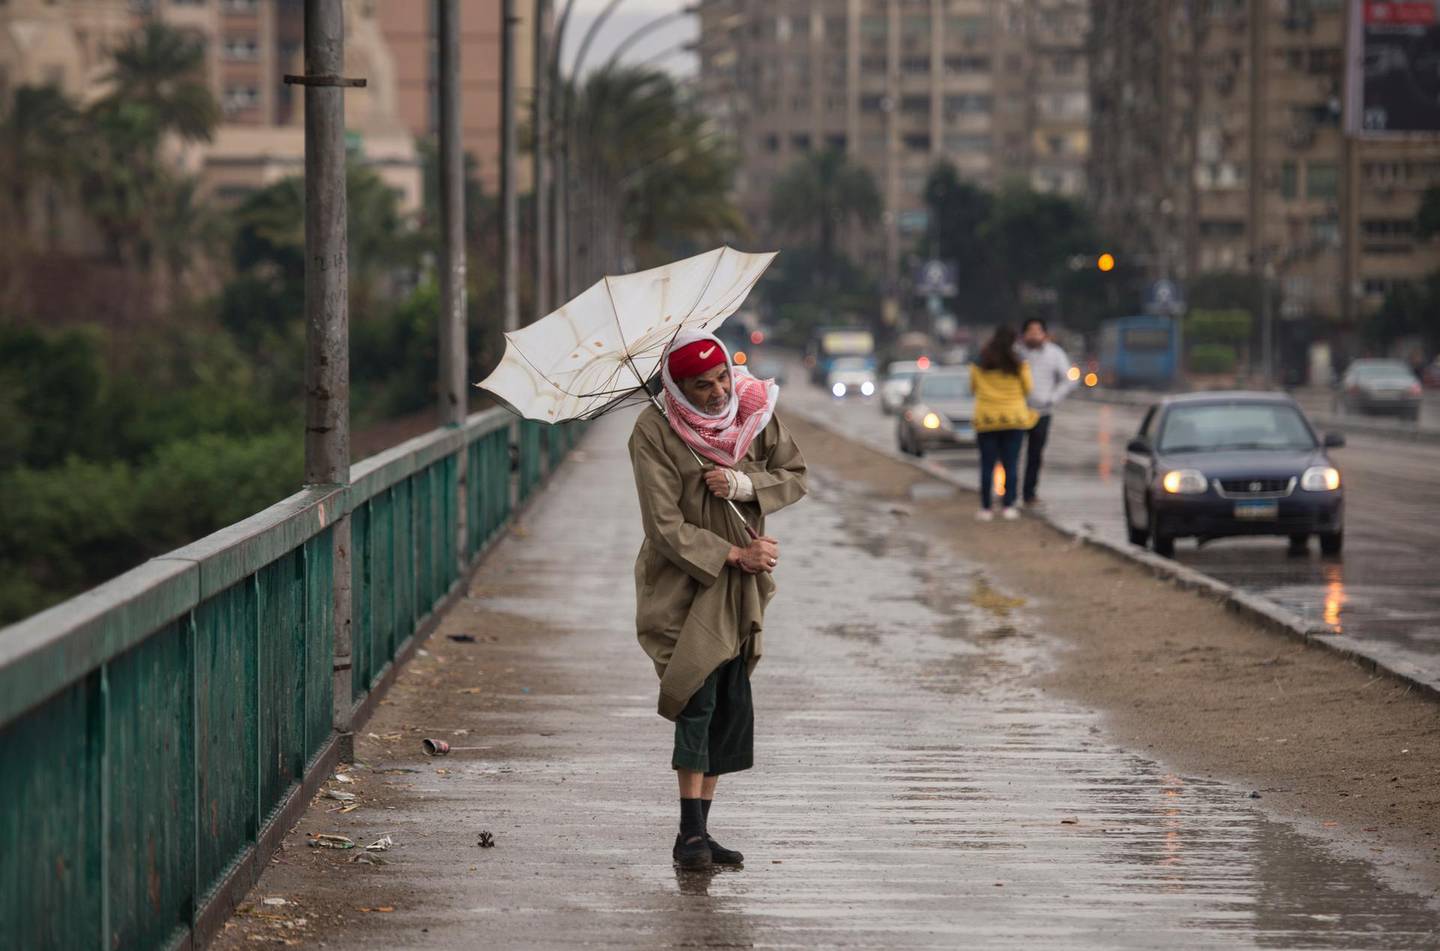 epa08288251 A man walks during a thunderstorm and heavy rains in Cairo, Egypt, 12 March 2020. The government announced the closure of schools and universities nationwide, planned sports events and matches are postponed. It is urging people to stay home, as the rain may exceeds the infrastructure's capacity in most cities.  EPA/Mohamed Hossam